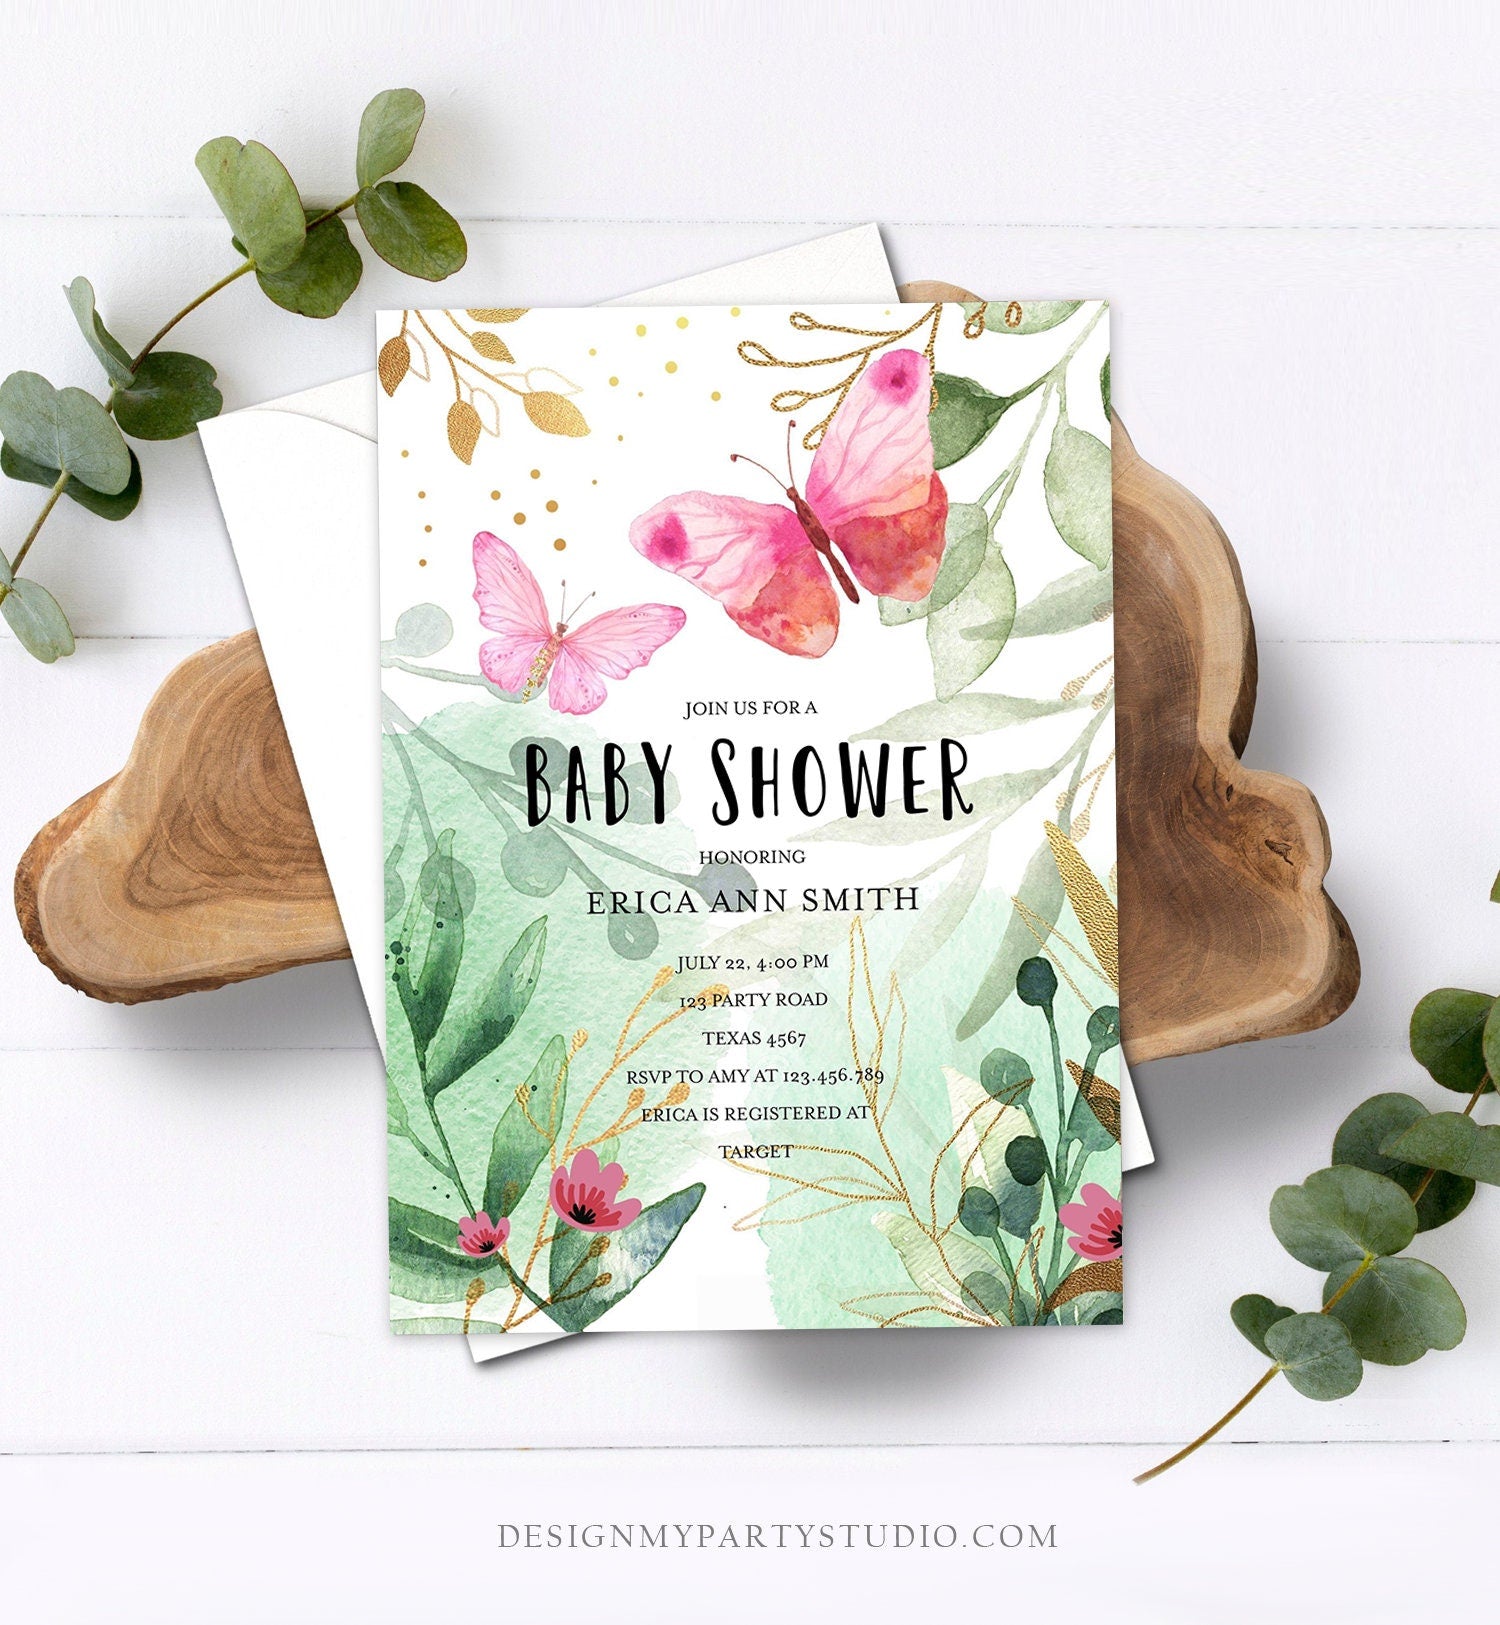 Editable Butterfly Baby Shower Invitation Pink and Gold Greenery Garden Tea Party Gender Neutral Invitation Template Download Corjl 0170